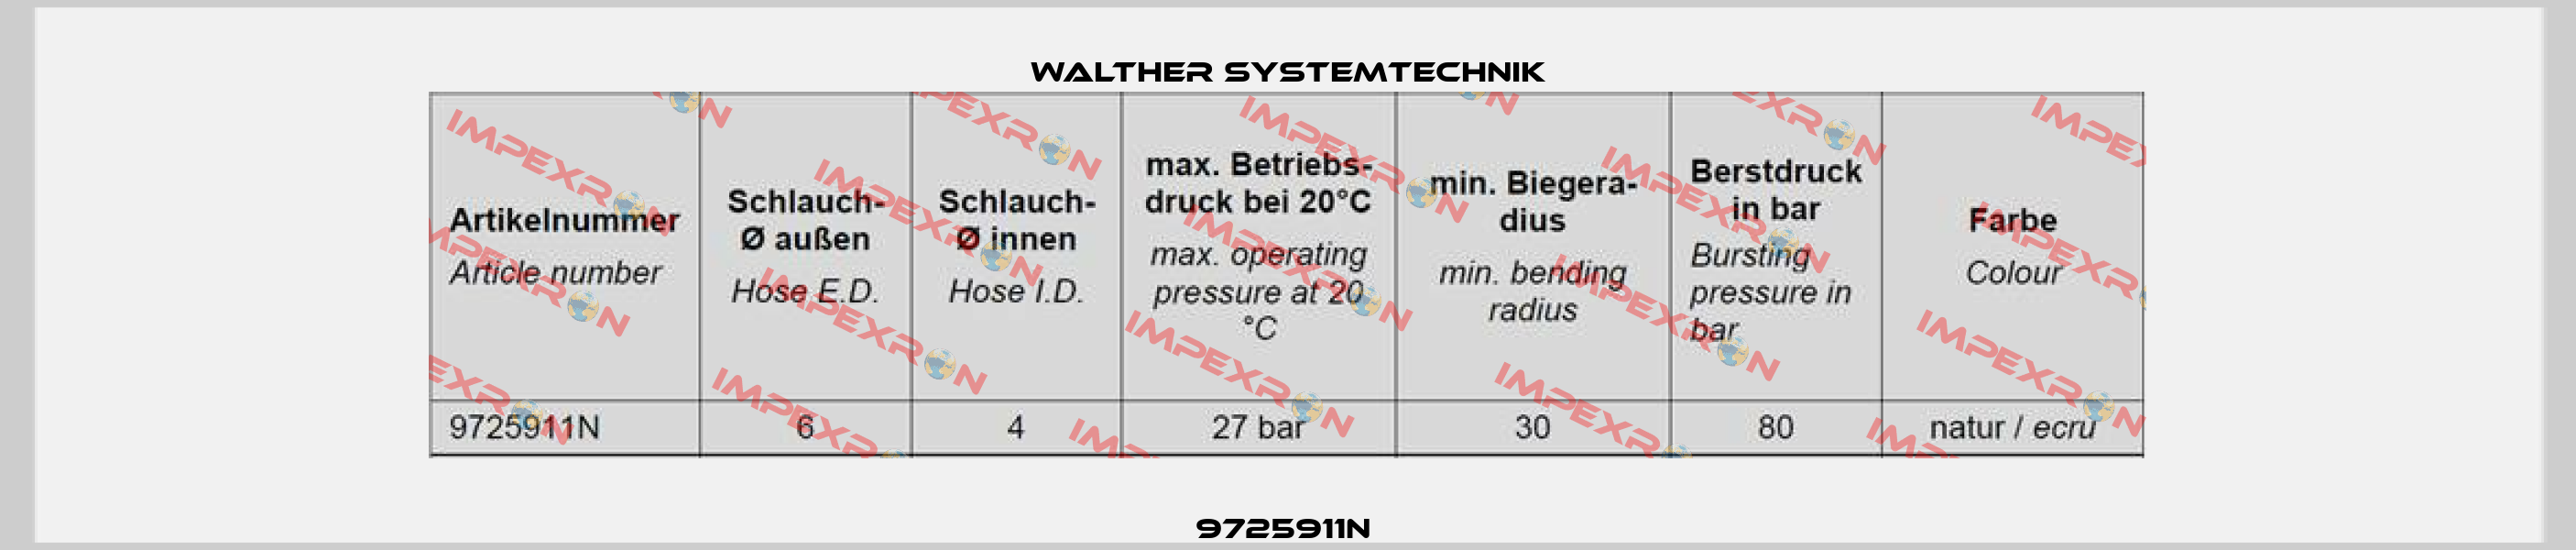 9725911N  Walther Systemtechnik